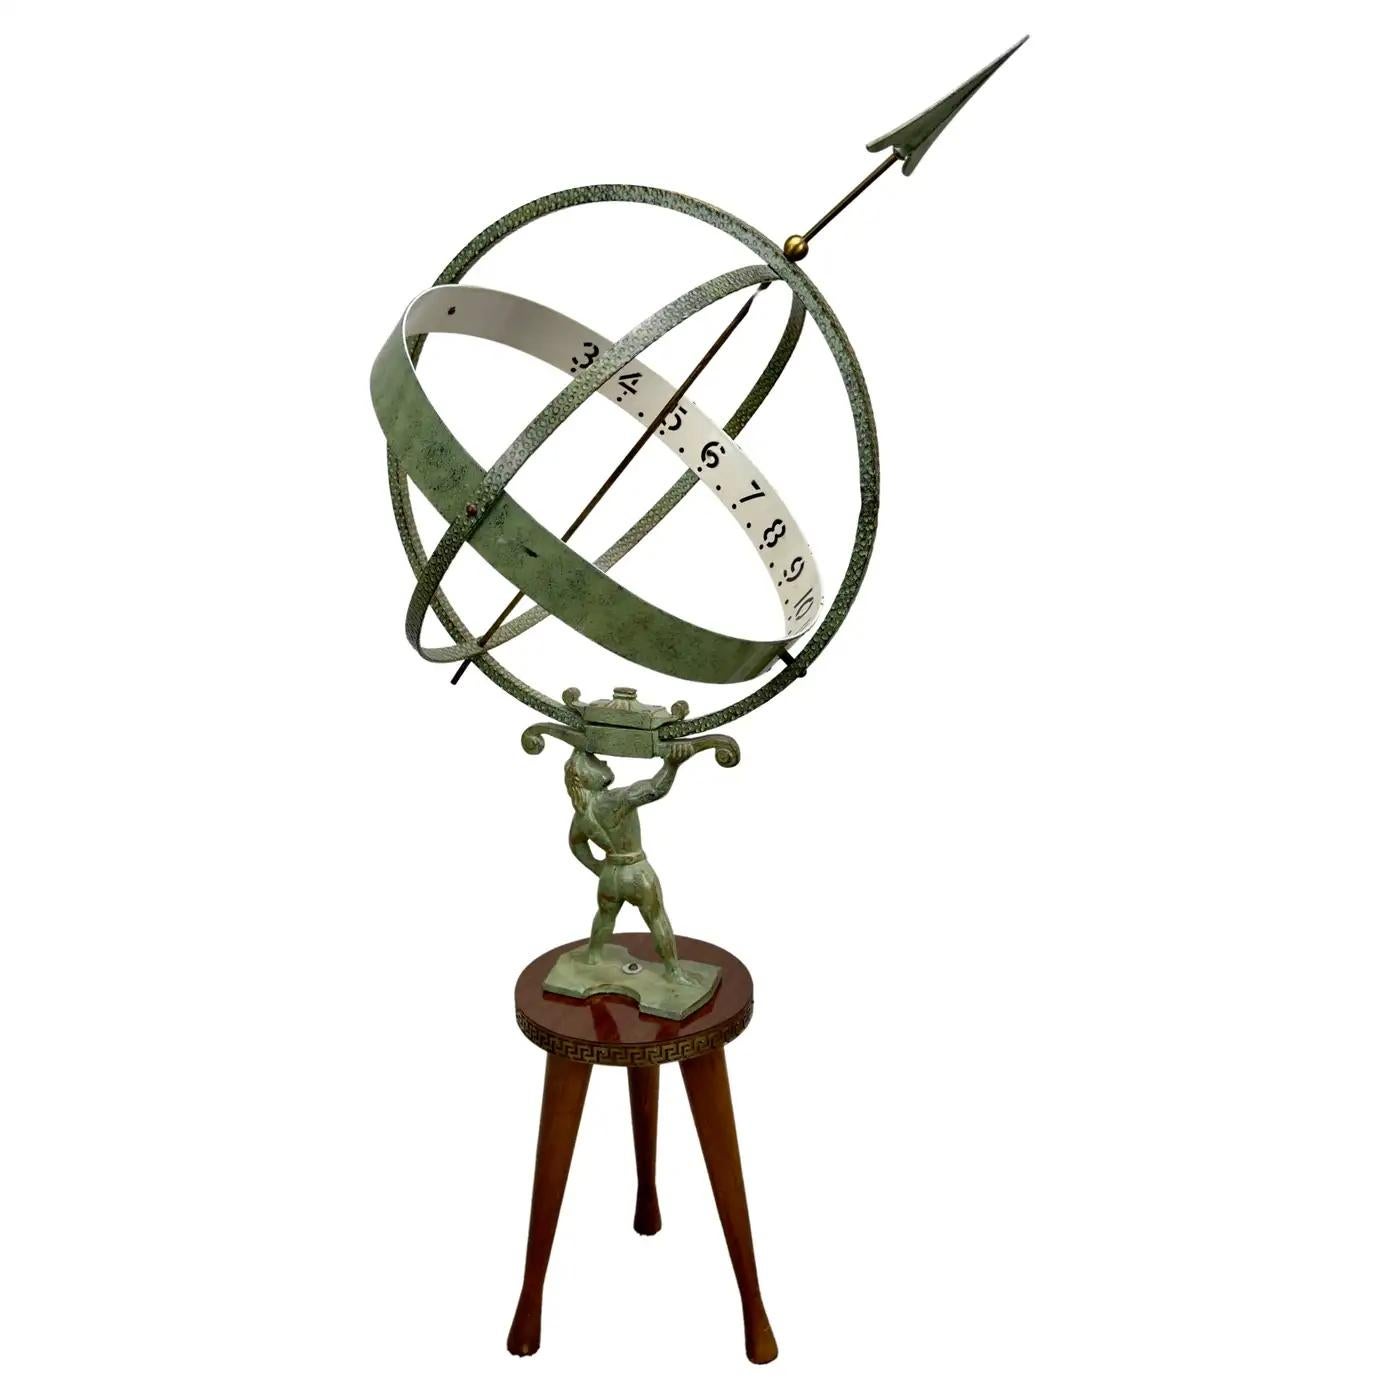 Vintage Original Sun Clock or Armillary Sun Dial attributed to the Swedish sculptor Sune Rooth ( Swedish - 1918 till present ), hailing from the mid-20th century. The Armillary sun dial garden ornament is originating from Sweden.  The sun clock